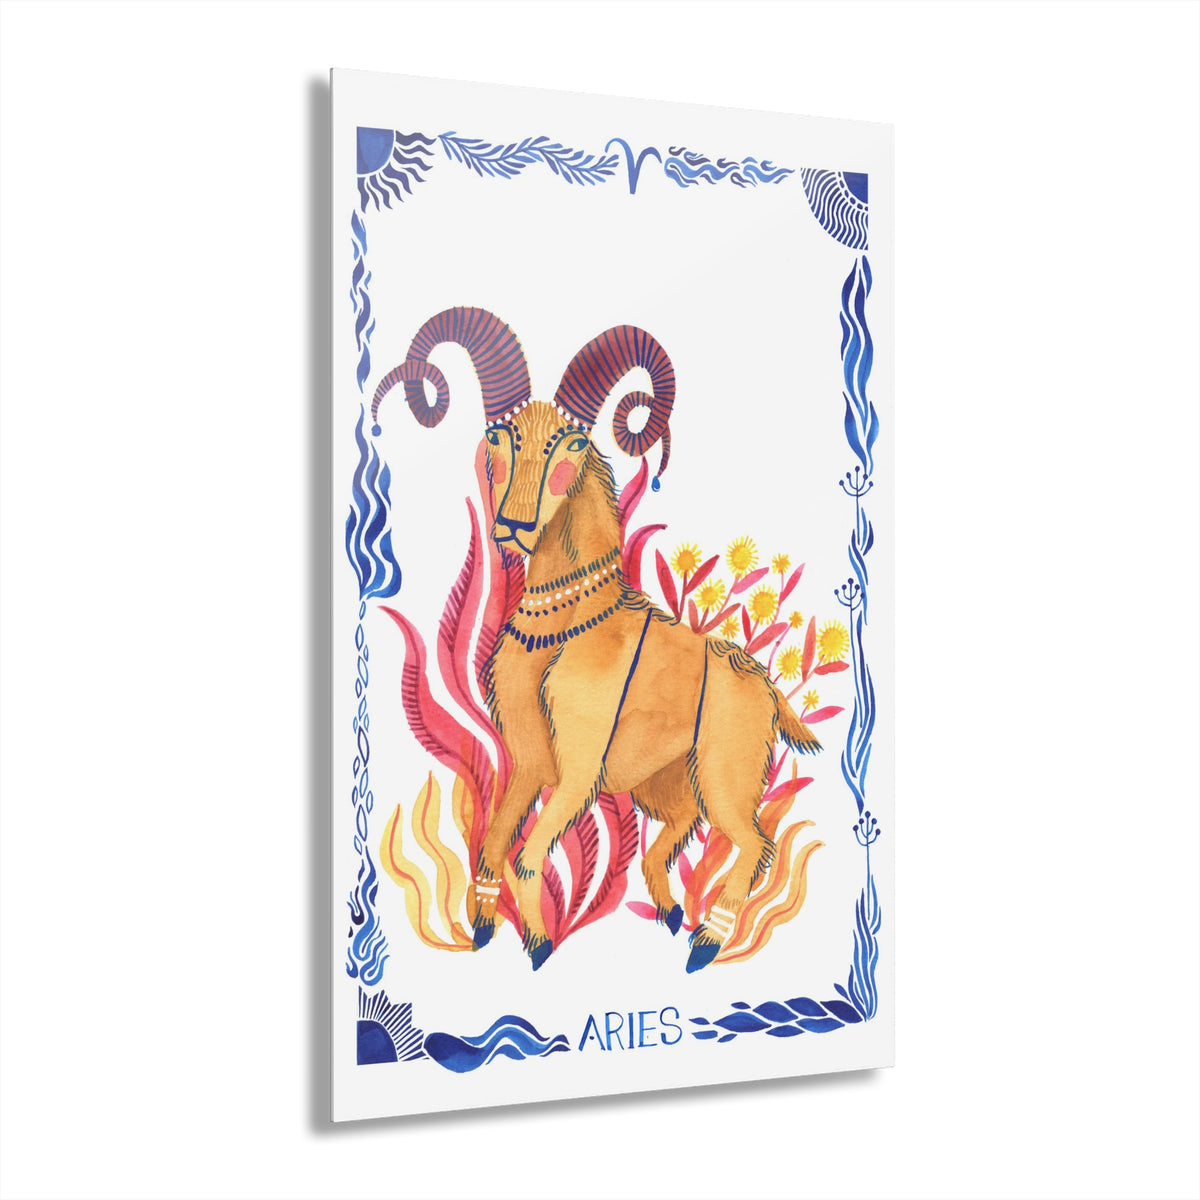 Fire & Fury: Aries Acrylic Print with French Cleat Hanging